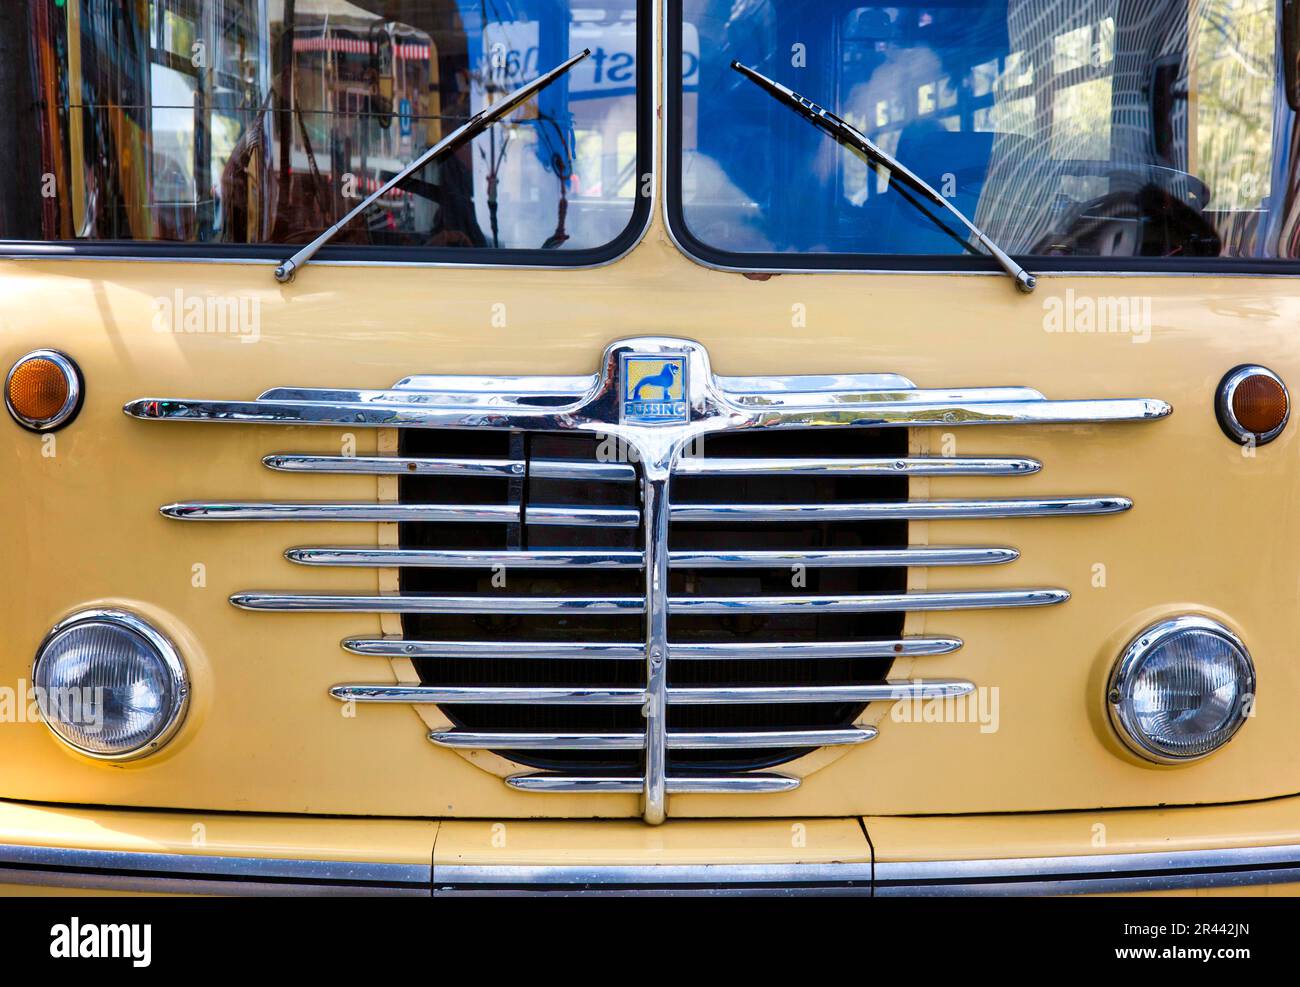 Radiator grille with logo of the Buessing DF double-decker bus of the BVG, Classic Days, Berlin, Germany Stock Photo